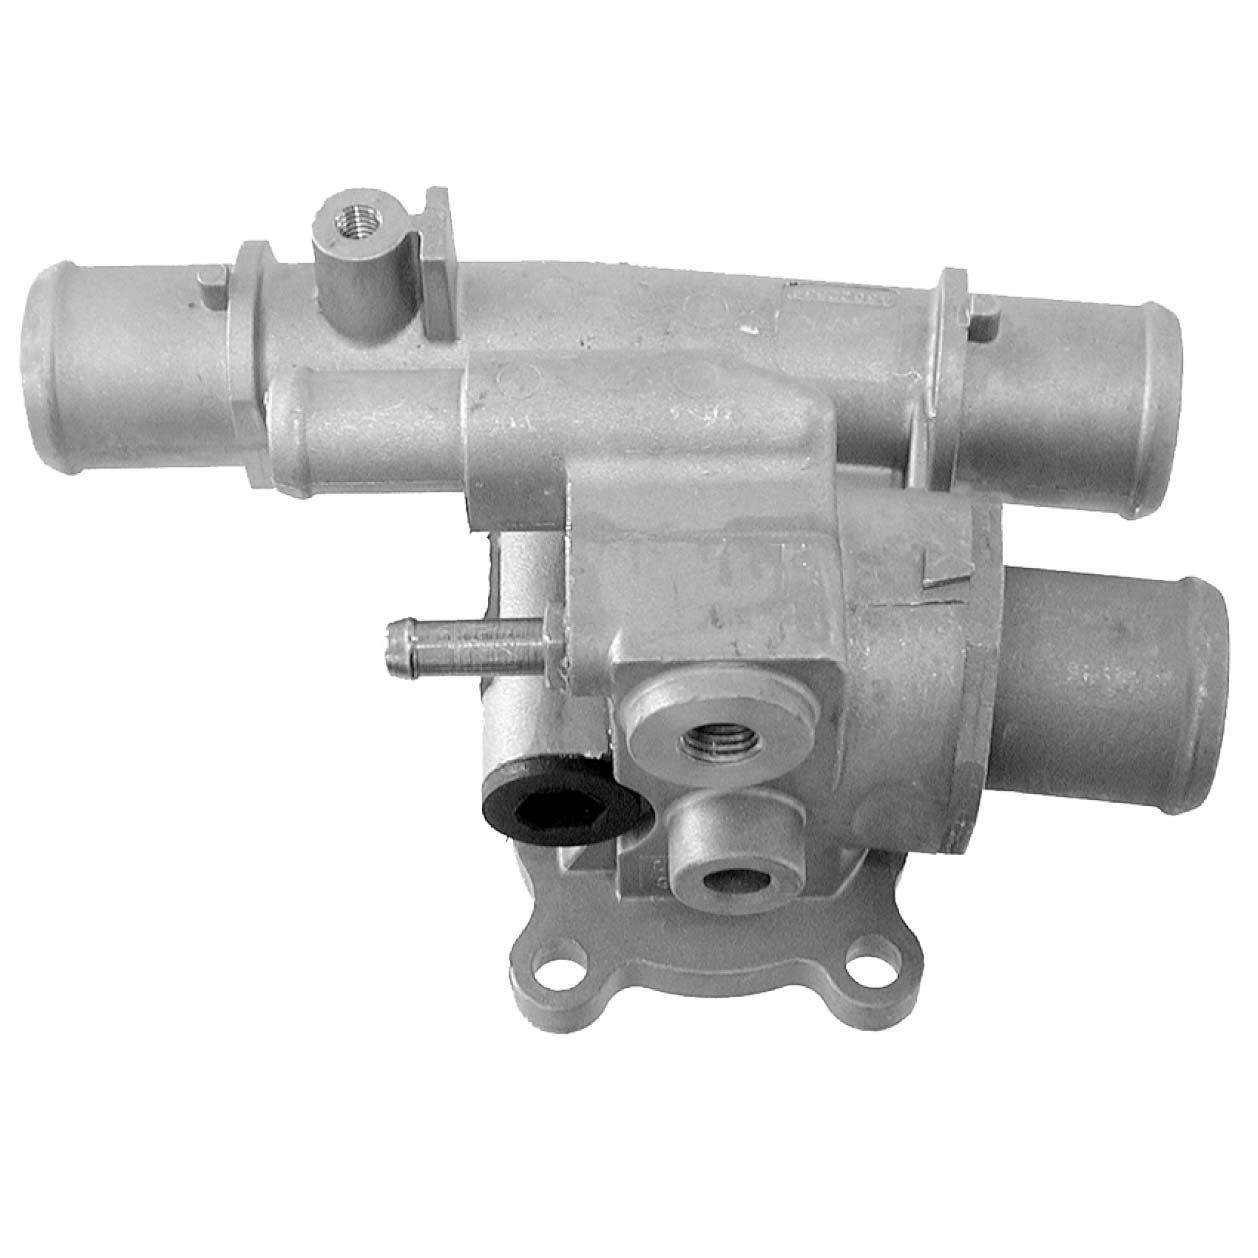 GATES TH17488G1 Engine thermostat Opening Temperature: 88°C, with gaskets/seals, with housing